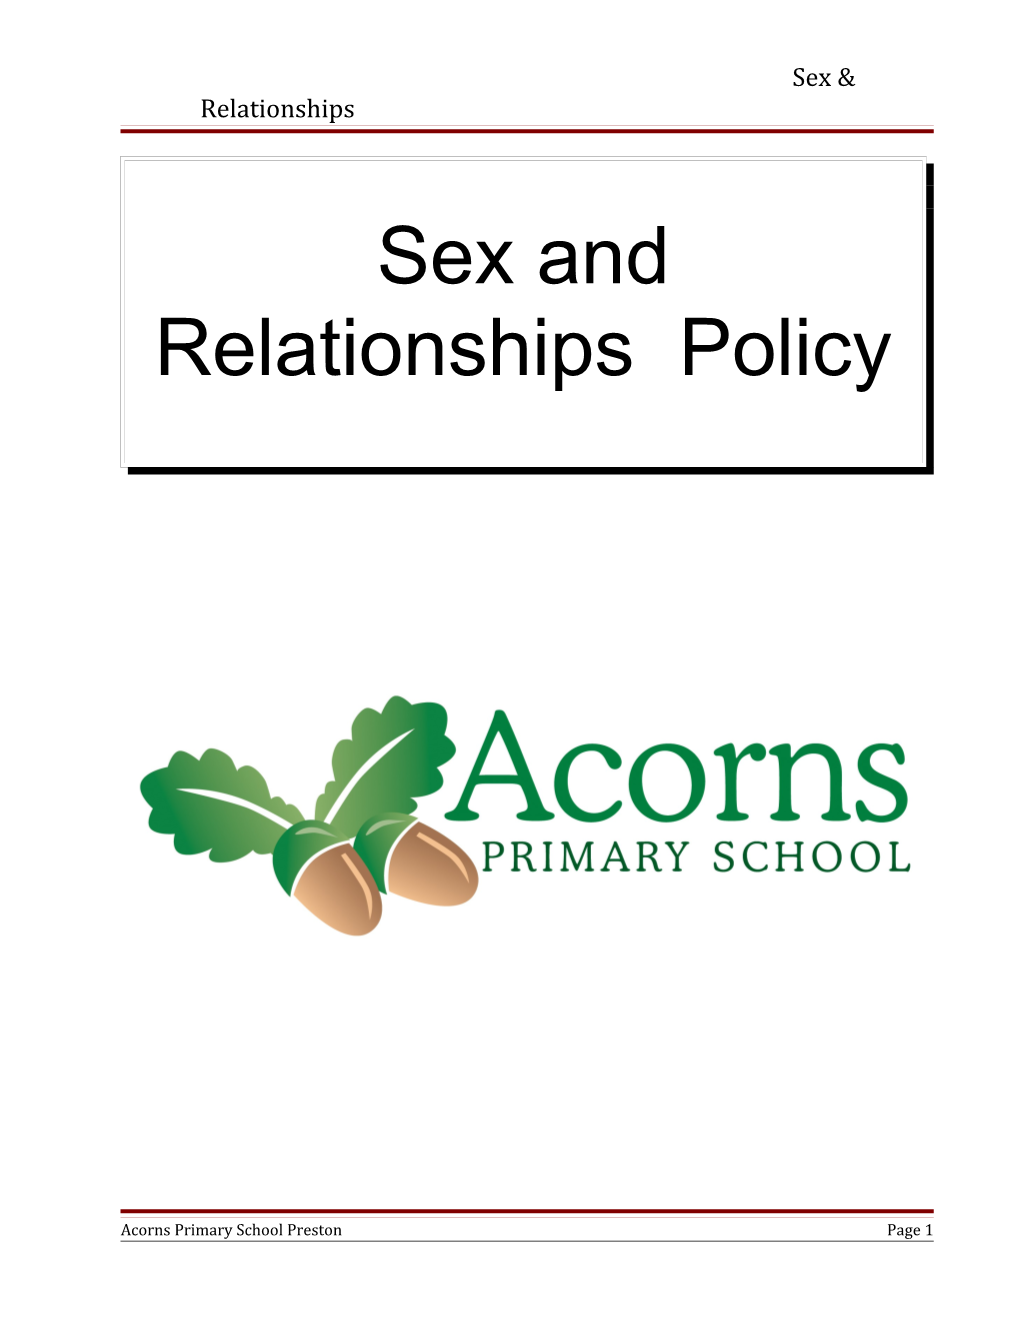 Sex and Relationship Education and the School Ethos